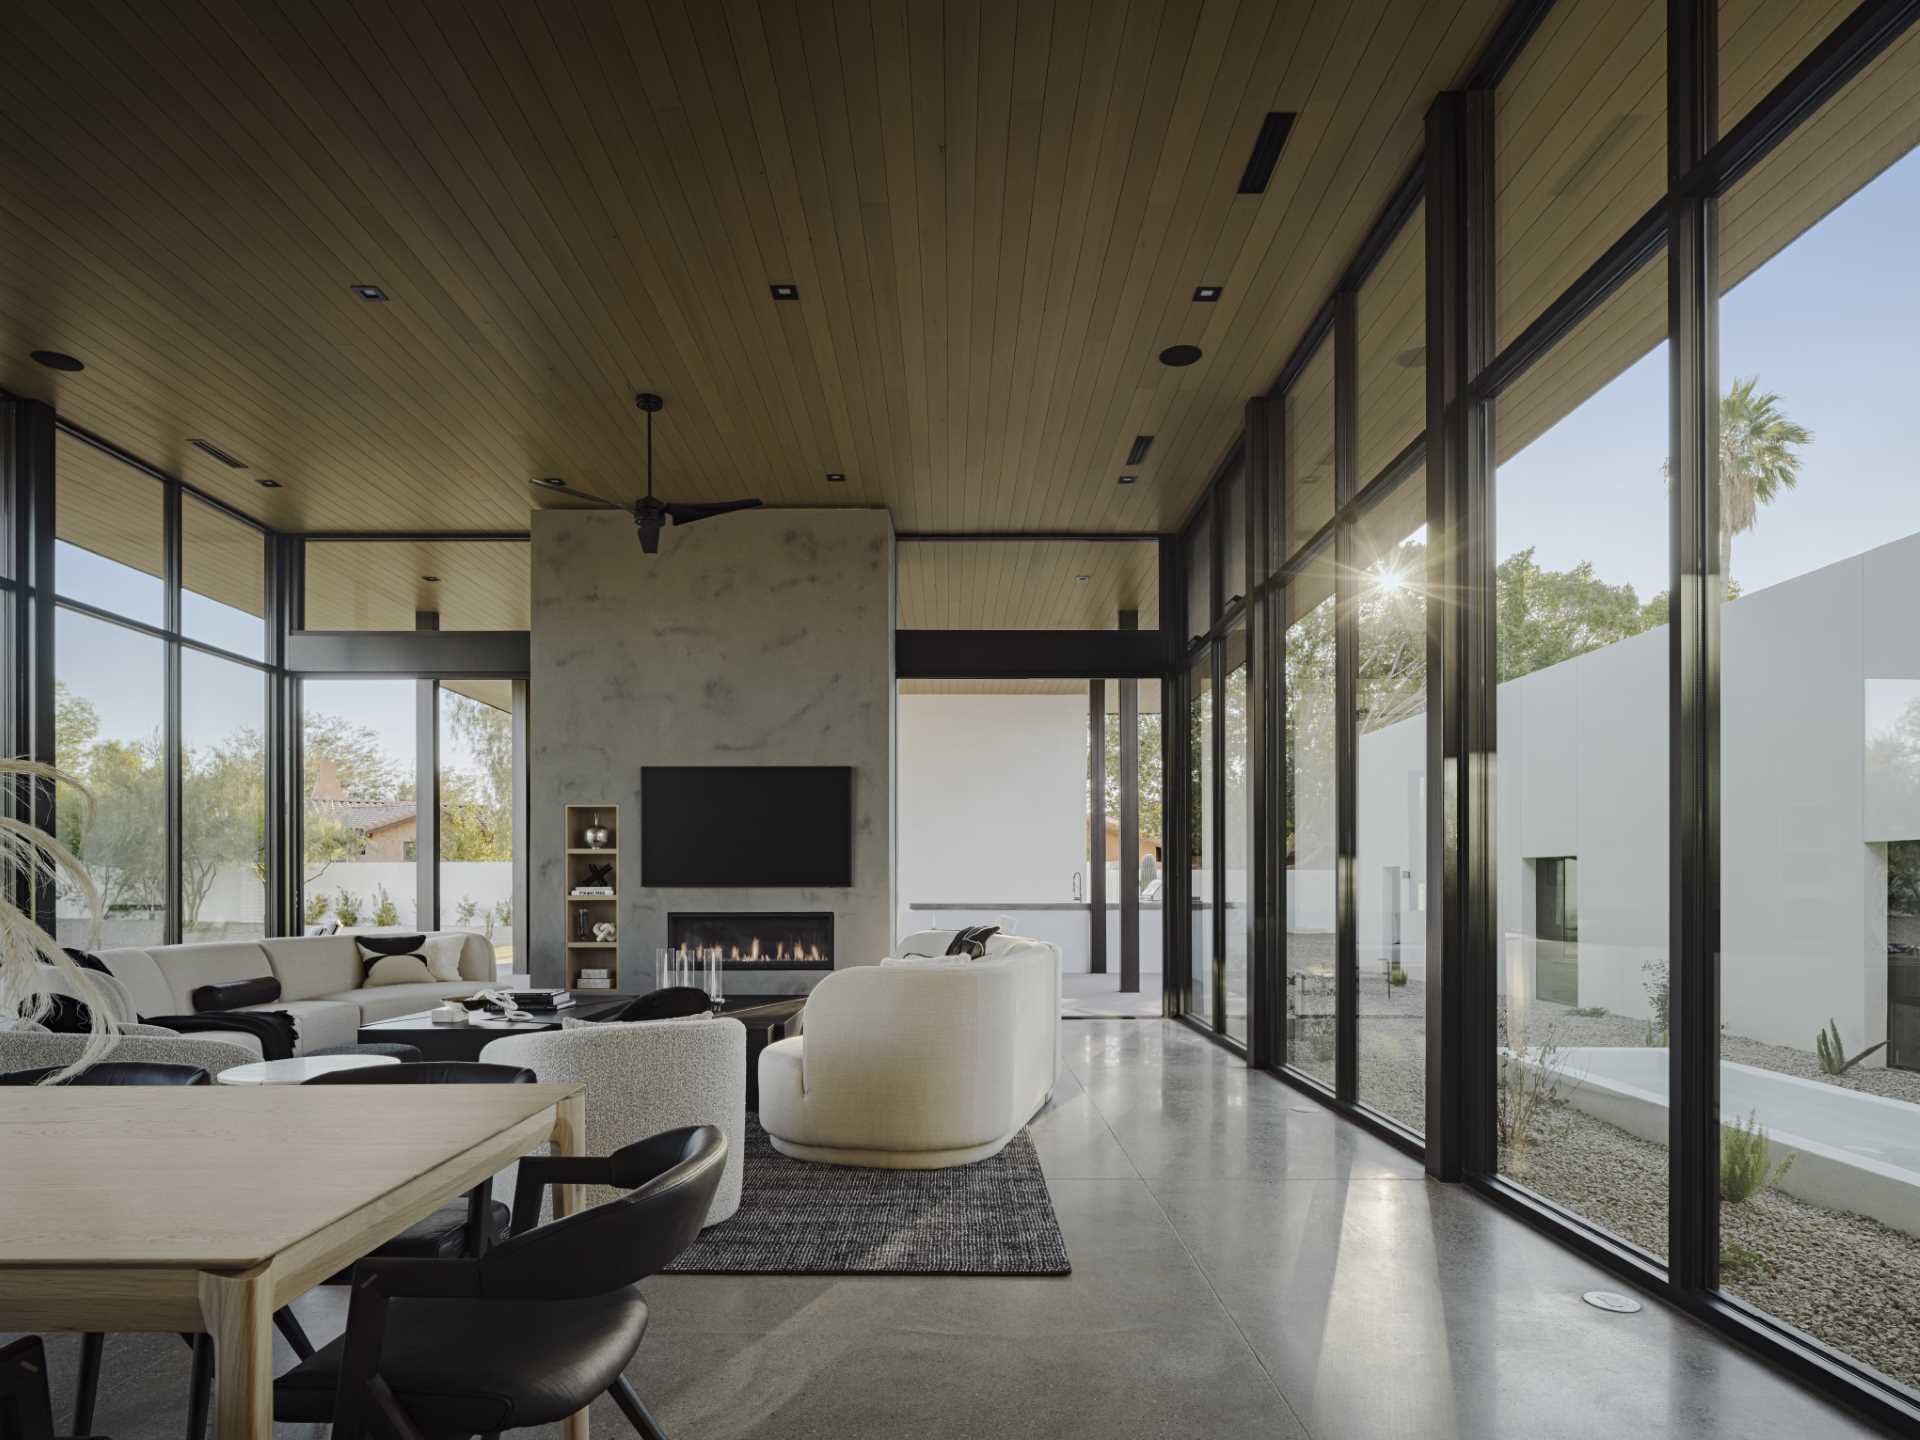 Pocketing glass doors hidden behind the plastered fireplace create a seamless connection to the patio.